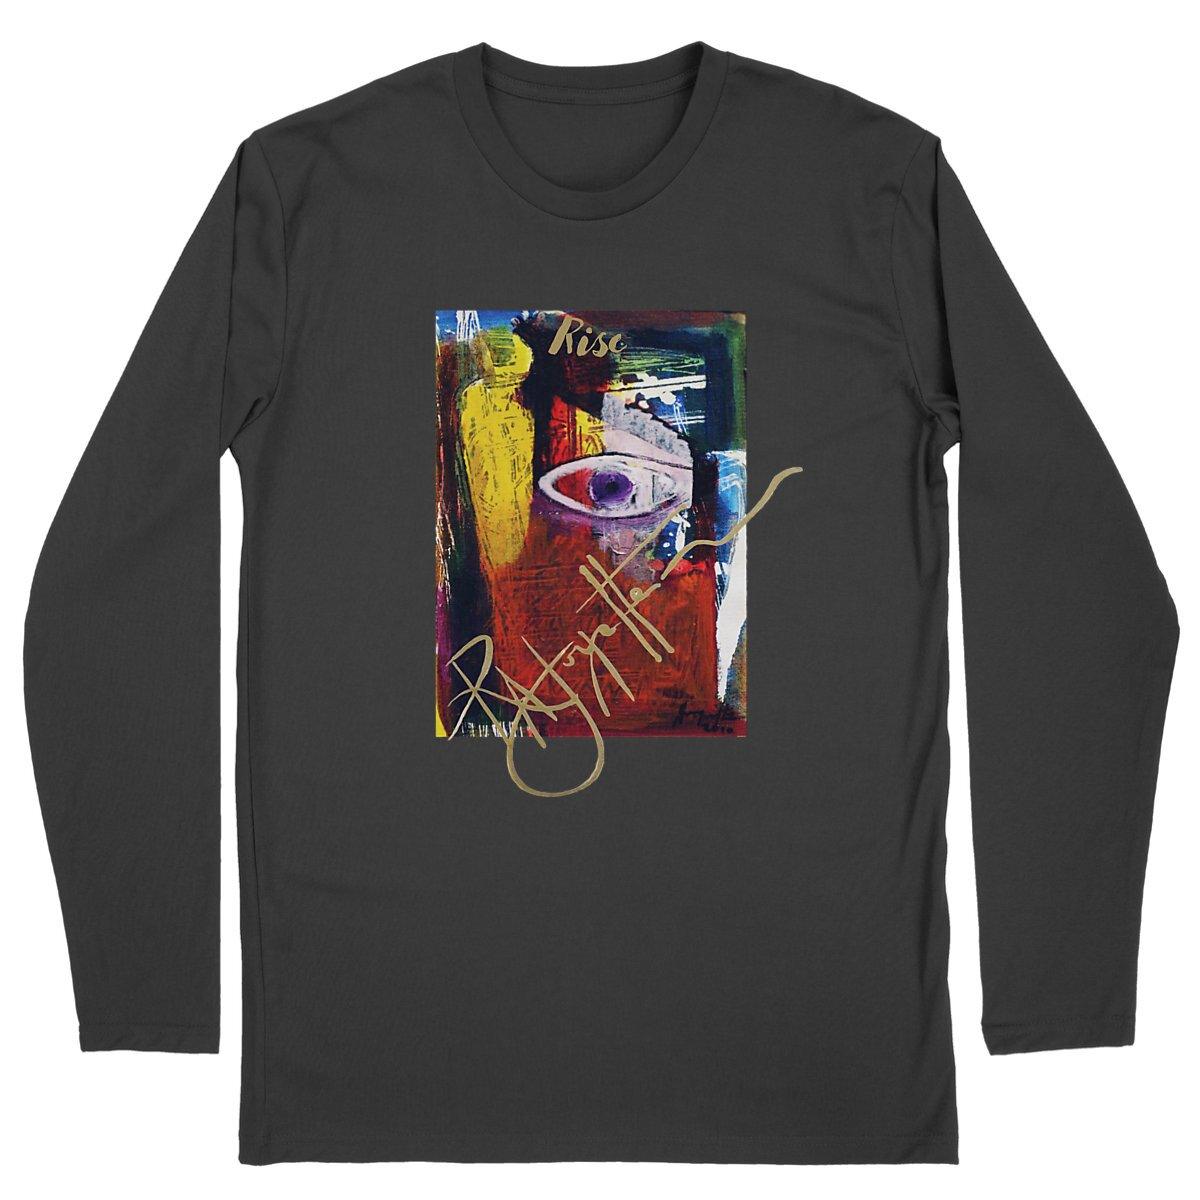 Rise! Dedication to Haiti Earthquake Disaster Premium Men's Medium Fit Organic Long Sleeve T-shirt, symbolizing support and resilience, crafted by Tree of Life Art.